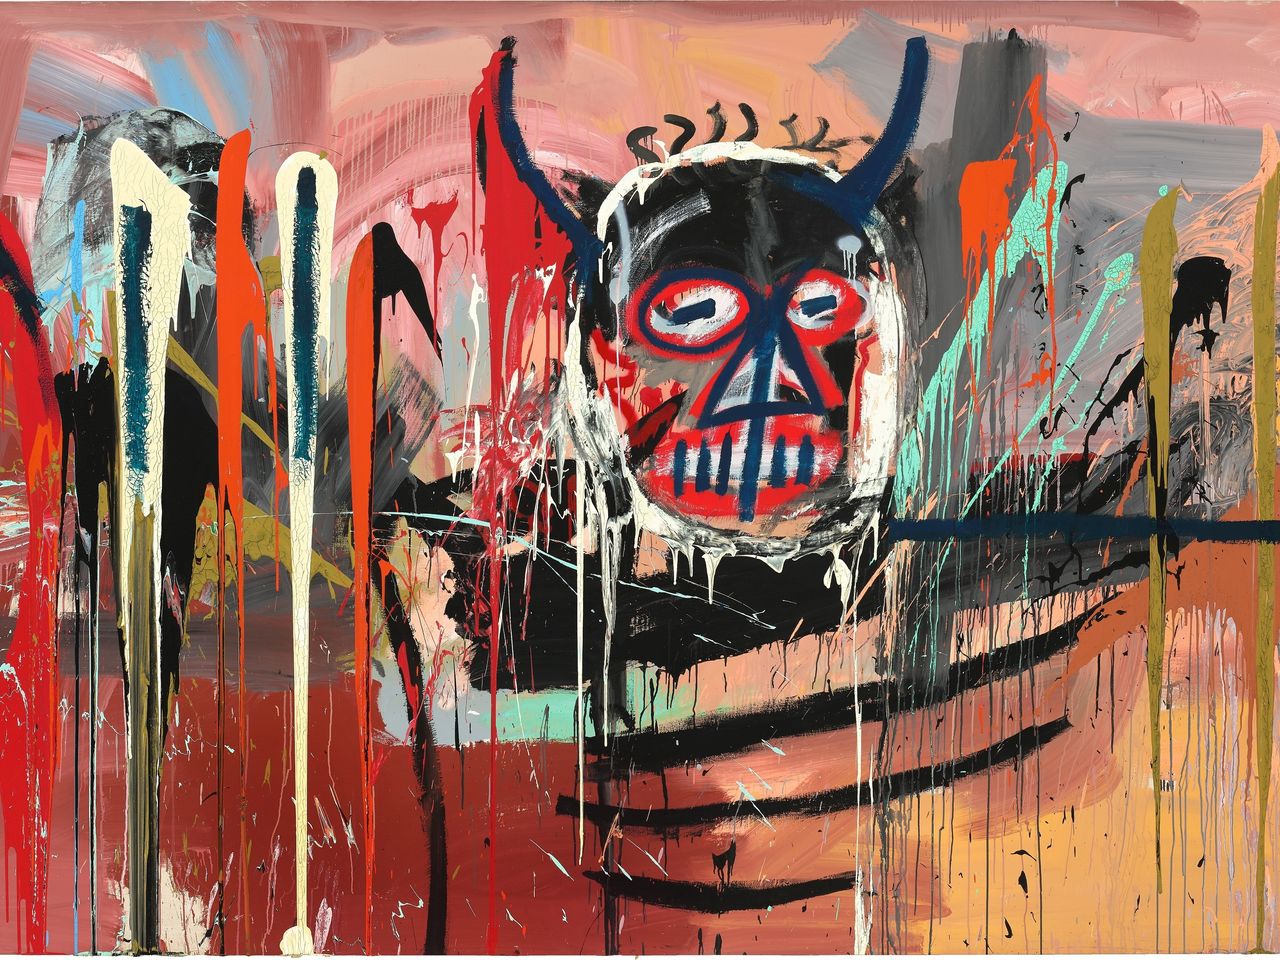 <p><strong>Untitled 1982</strong> by Jean-Michel Basquiat</p><p>$ 85 million</p>